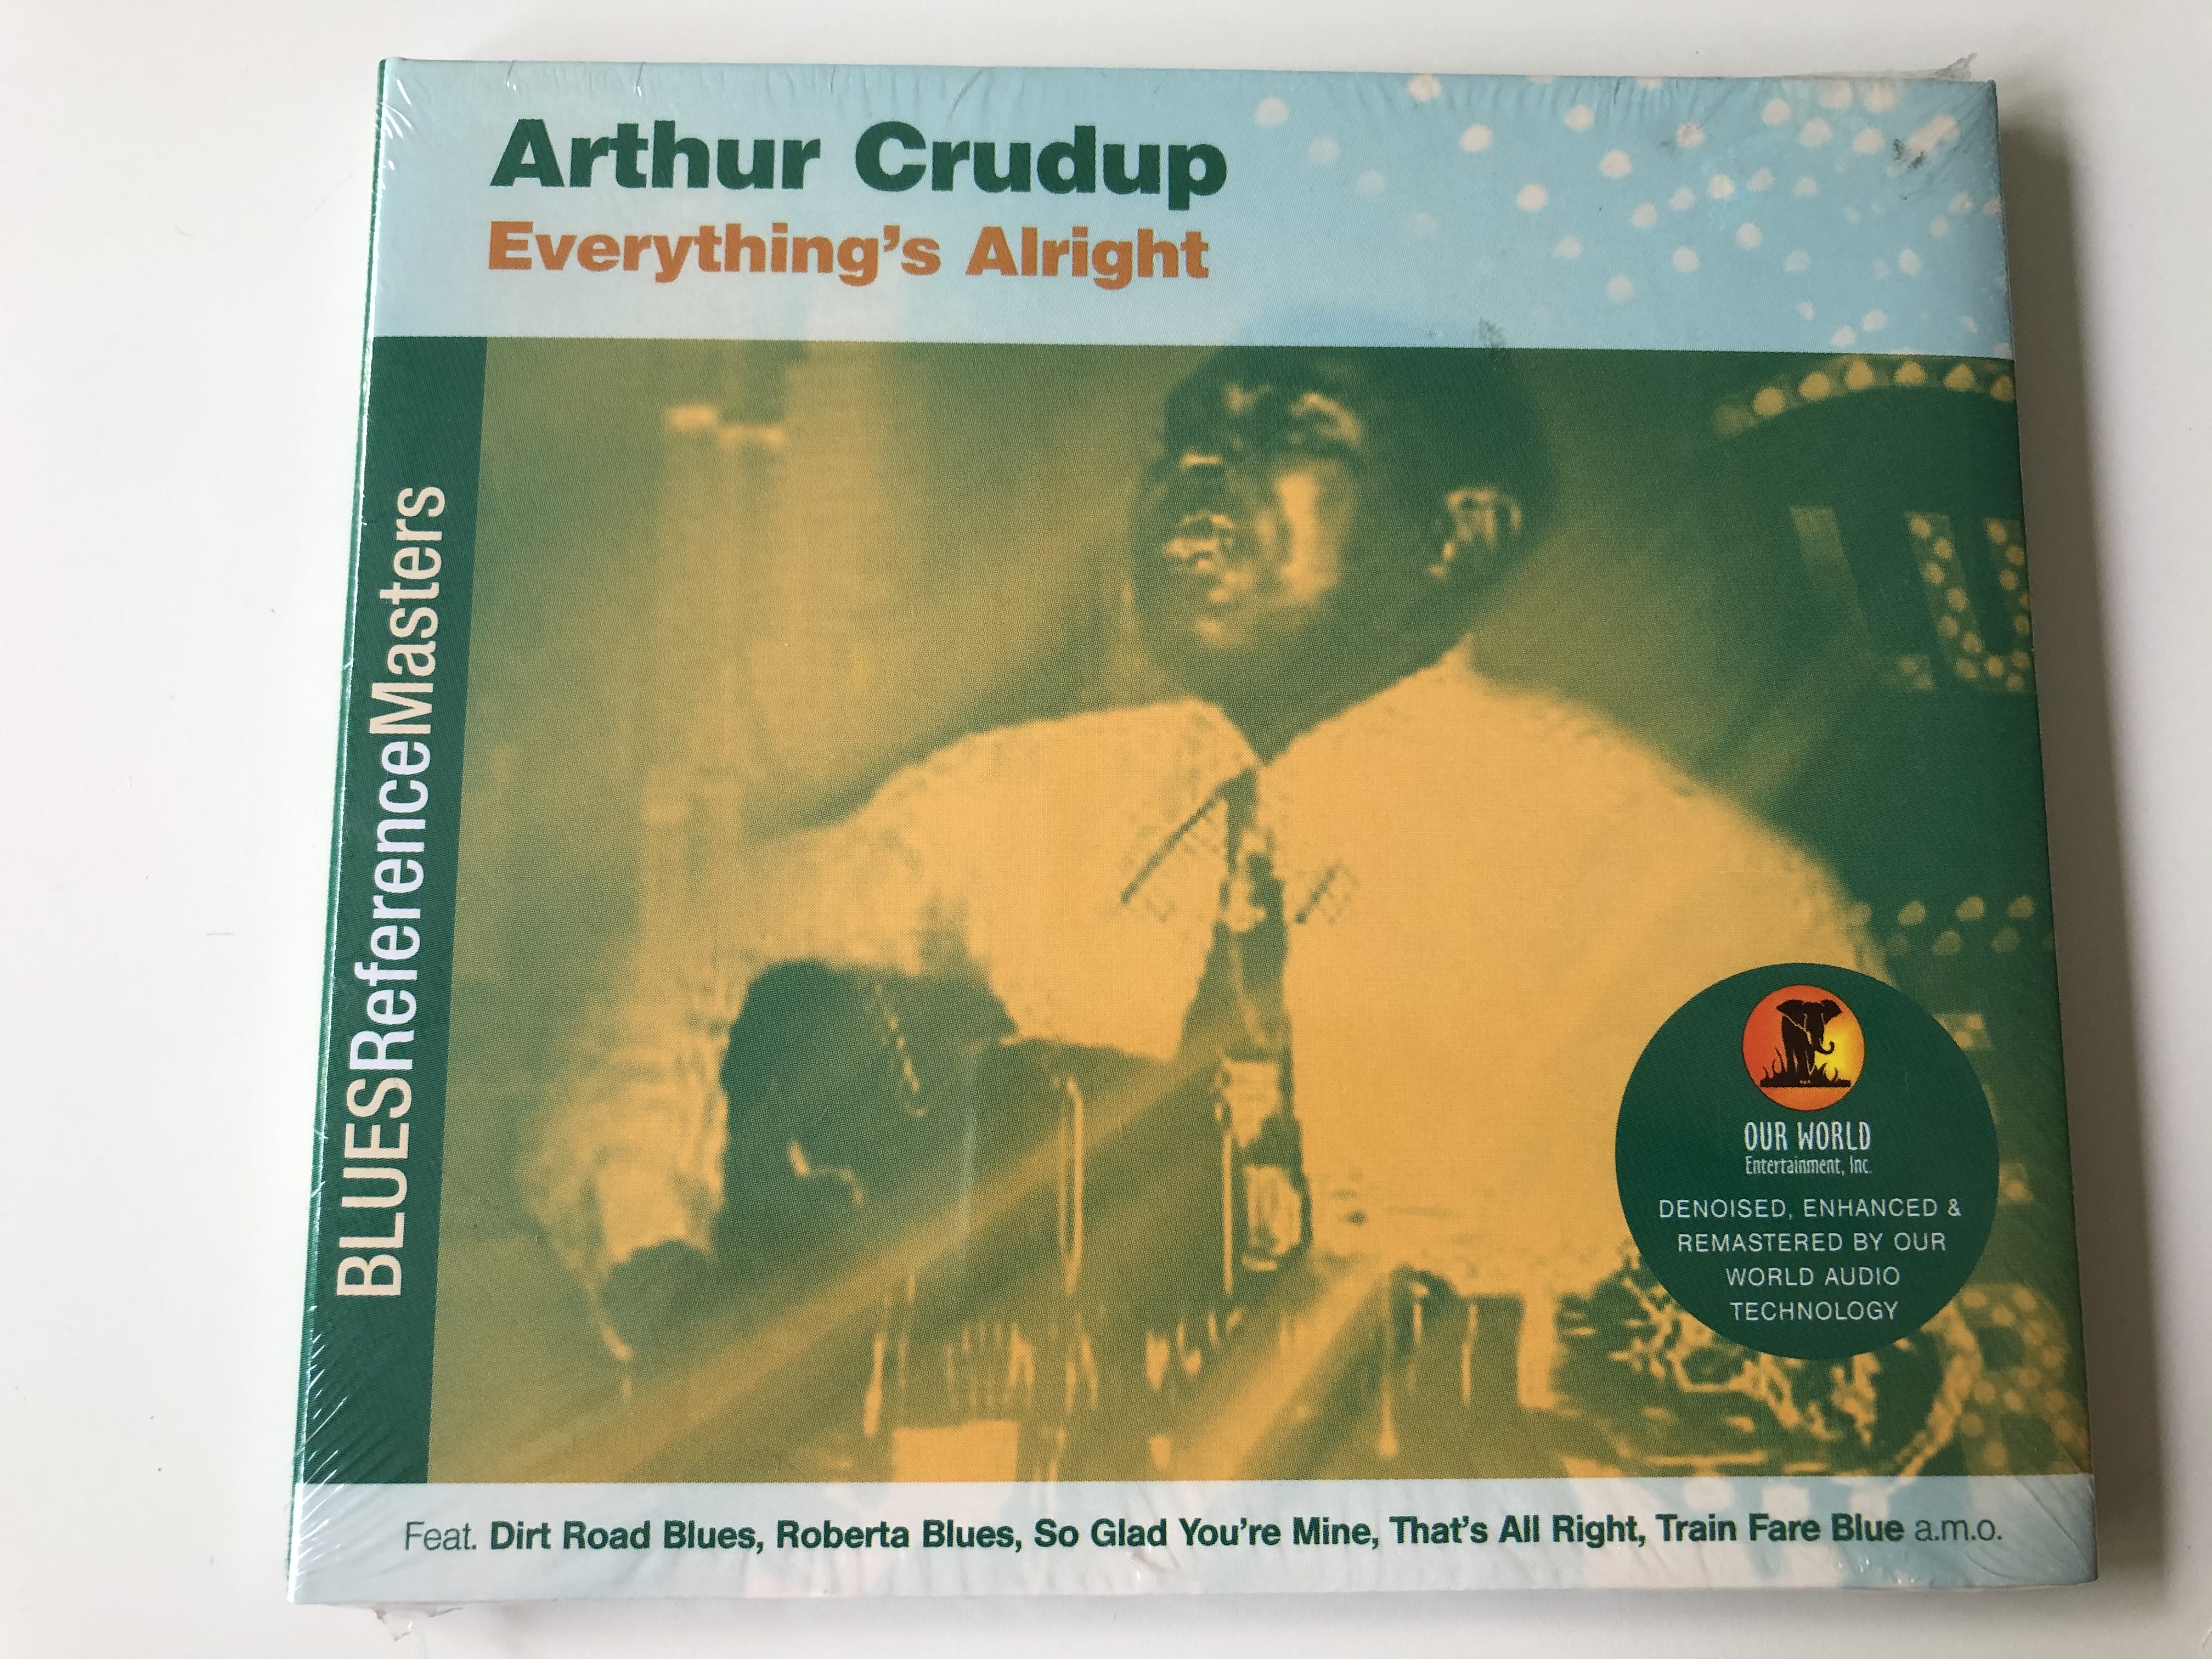 World　Alright　Everything's　Blues,　Train　CD　Entertainment,　804558330325　Dirt　Masters　Blues,　Reference　Road　So　You're　2002　Glad　All　Our　‎Audio　That's　Mine,　Right,　Inc.　bibleinmylanguage　Fare　BLUES　‎–　Crudup　Arthur　Feat.